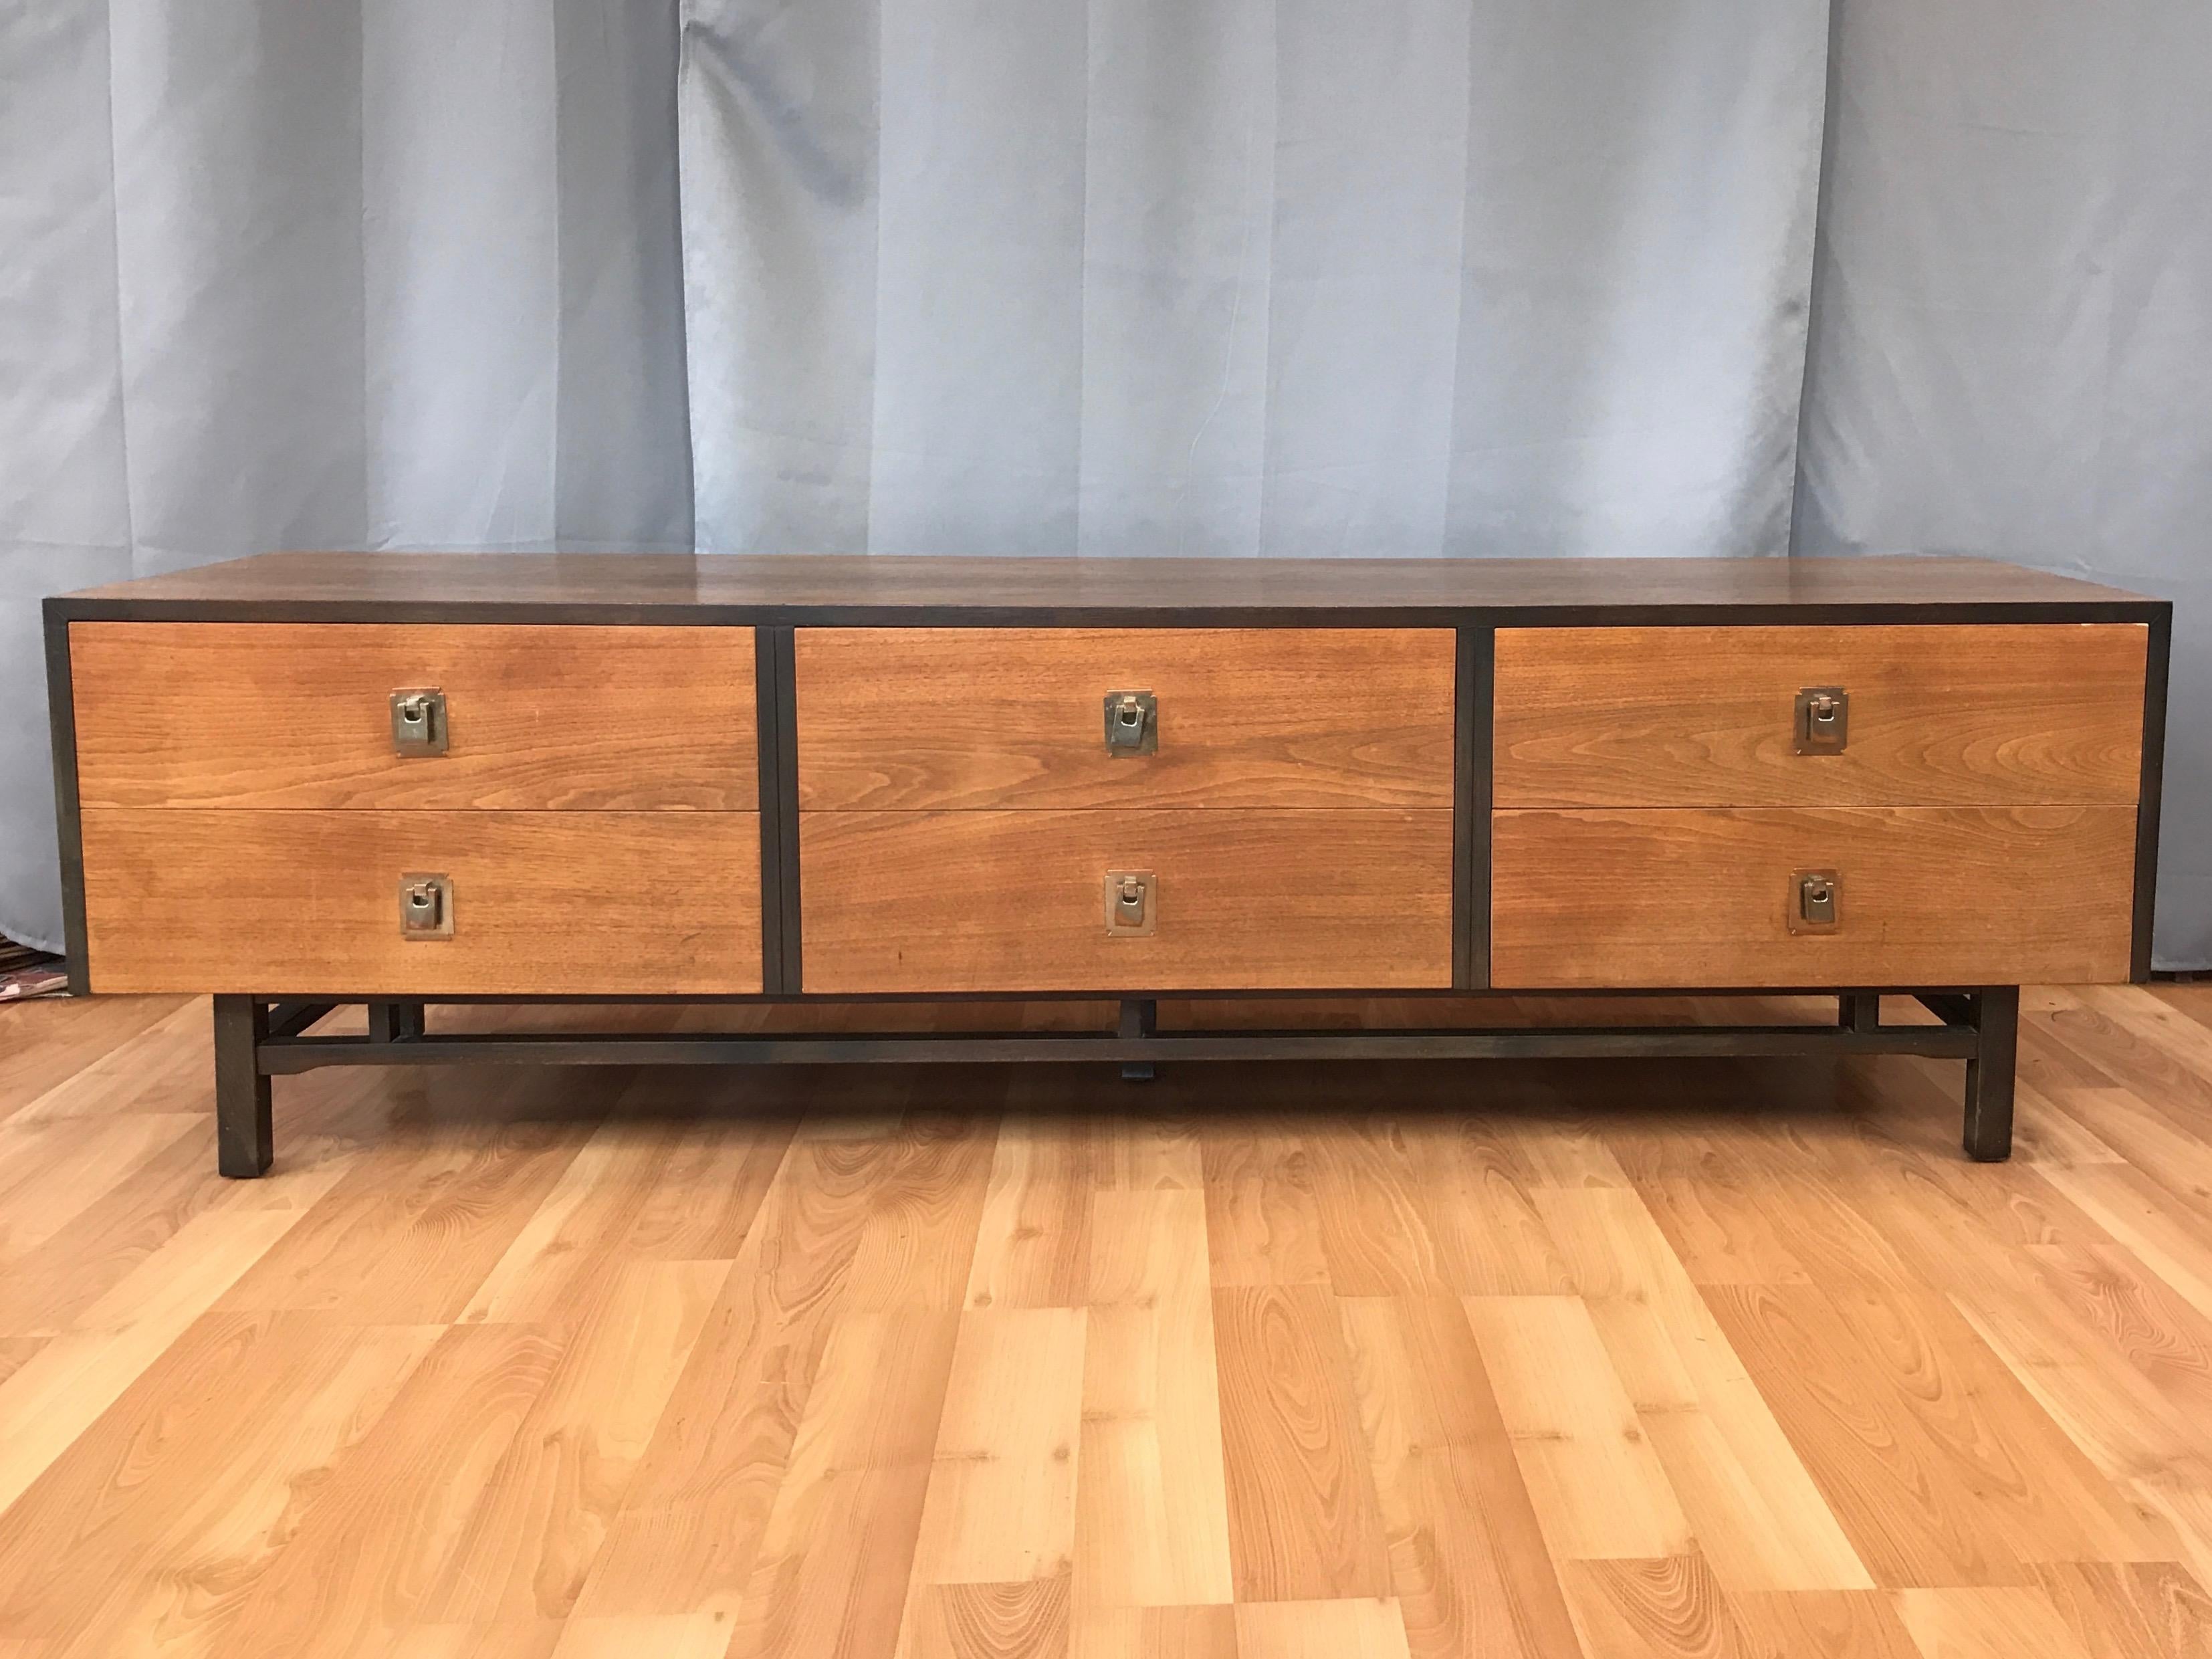 A 1950s six-drawer elm sideboard or credenza, made in Japan.

Long and low, with a clean Mid-Century Modern design that would complement pieces by McCobb, Knoll, and Nelson, with a few subtle Asian-style touches that set it apart. 

Features a